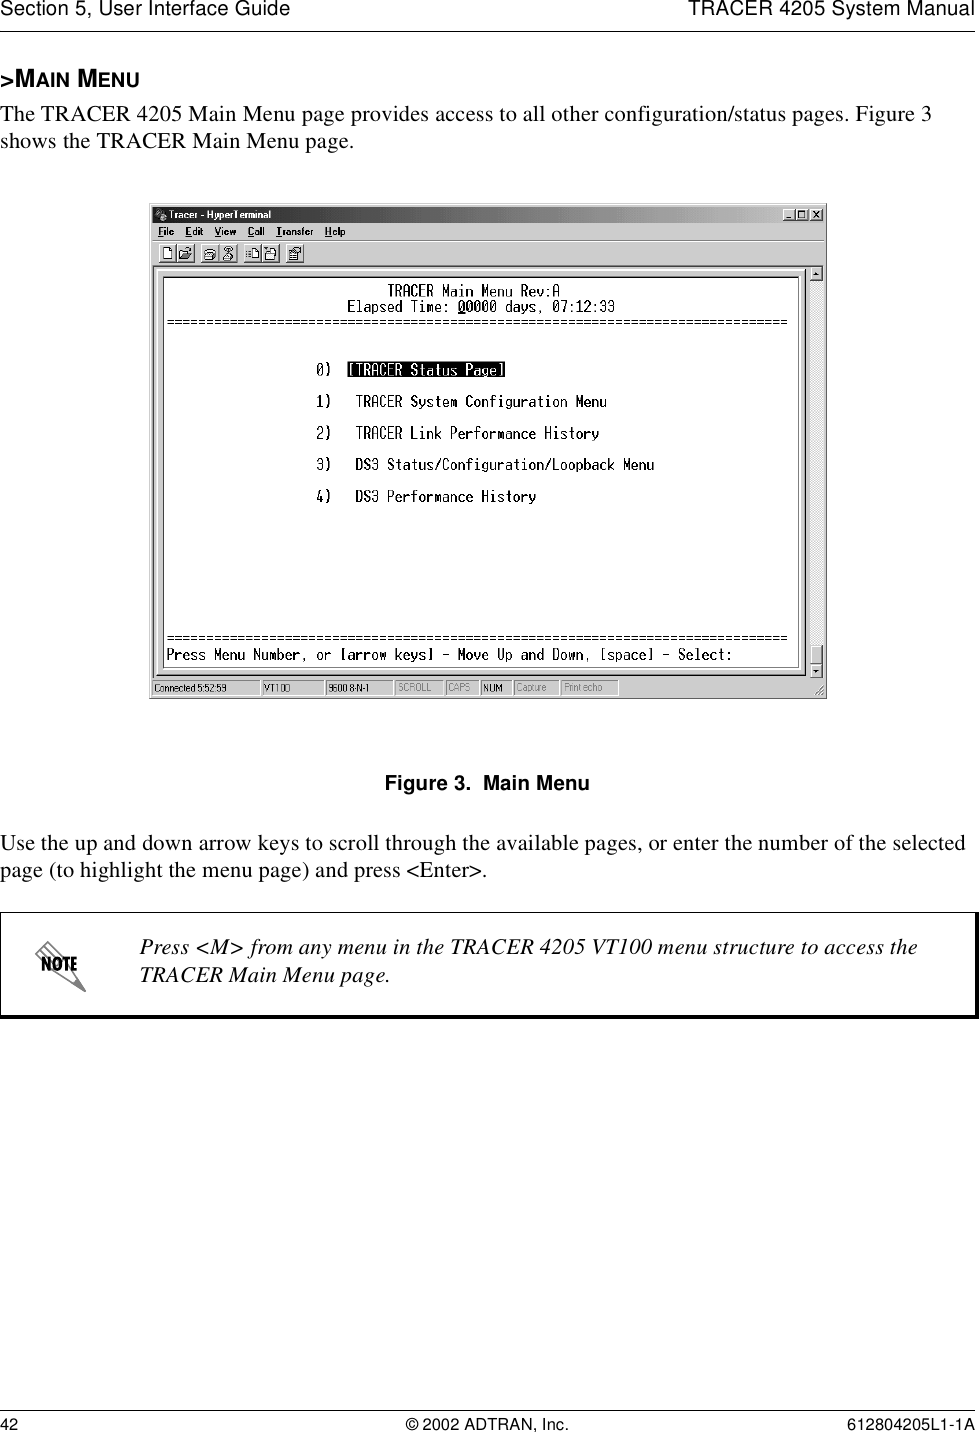 Section 5, User Interface Guide TRACER 4205 System Manual42 © 2002 ADTRAN, Inc. 612804205L1-1A&gt;MAIN MENUThe TRACER 4205 Main Menu page provides access to all other configuration/status pages. Figure 3 shows the TRACER Main Menu page.Figure 3.  Main MenuUse the up and down arrow keys to scroll through the available pages, or enter the number of the selected page (to highlight the menu page) and press &lt;Enter&gt;.Press &lt;M&gt; from any menu in the TRACER 4205 VT100 menu structure to access the TRACER Main Menu page.